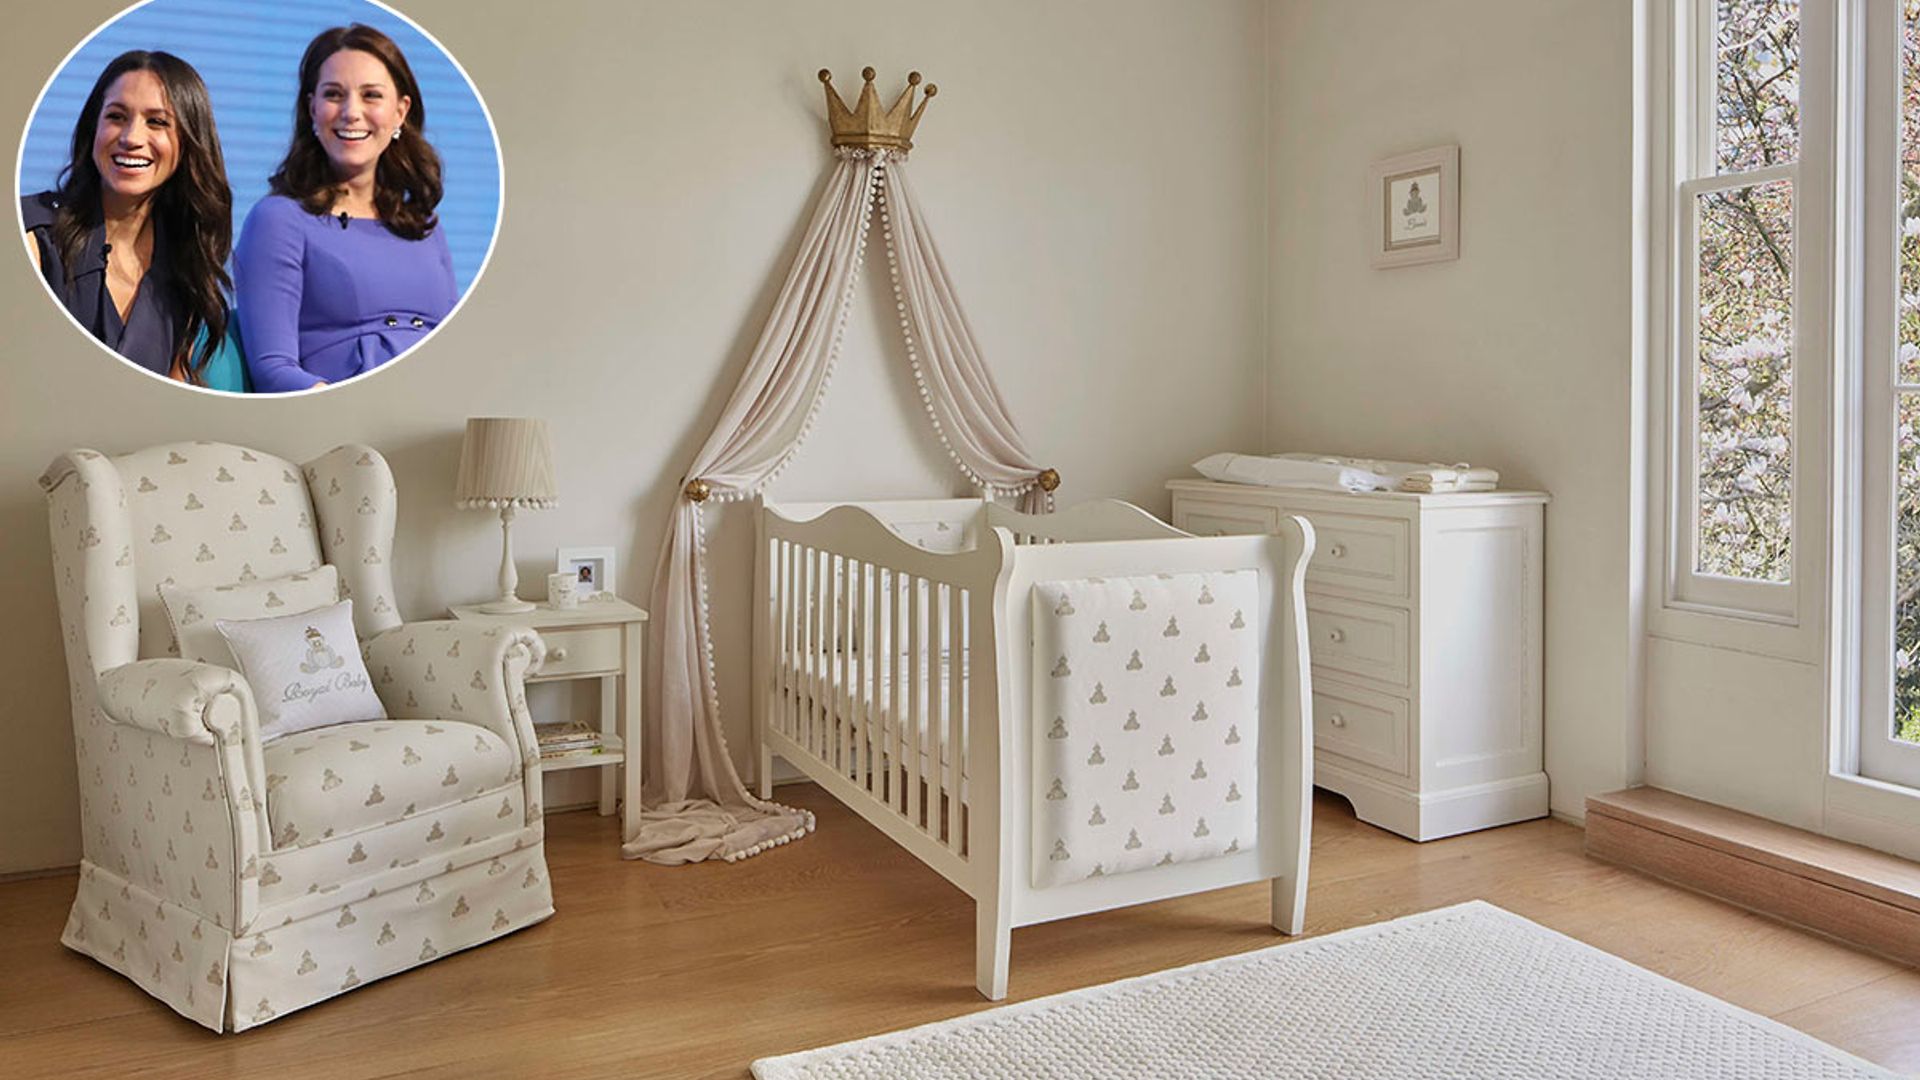 Kate Middleton's favourite baby brand just launched a new royal baby range – and Meghan Markle will love it